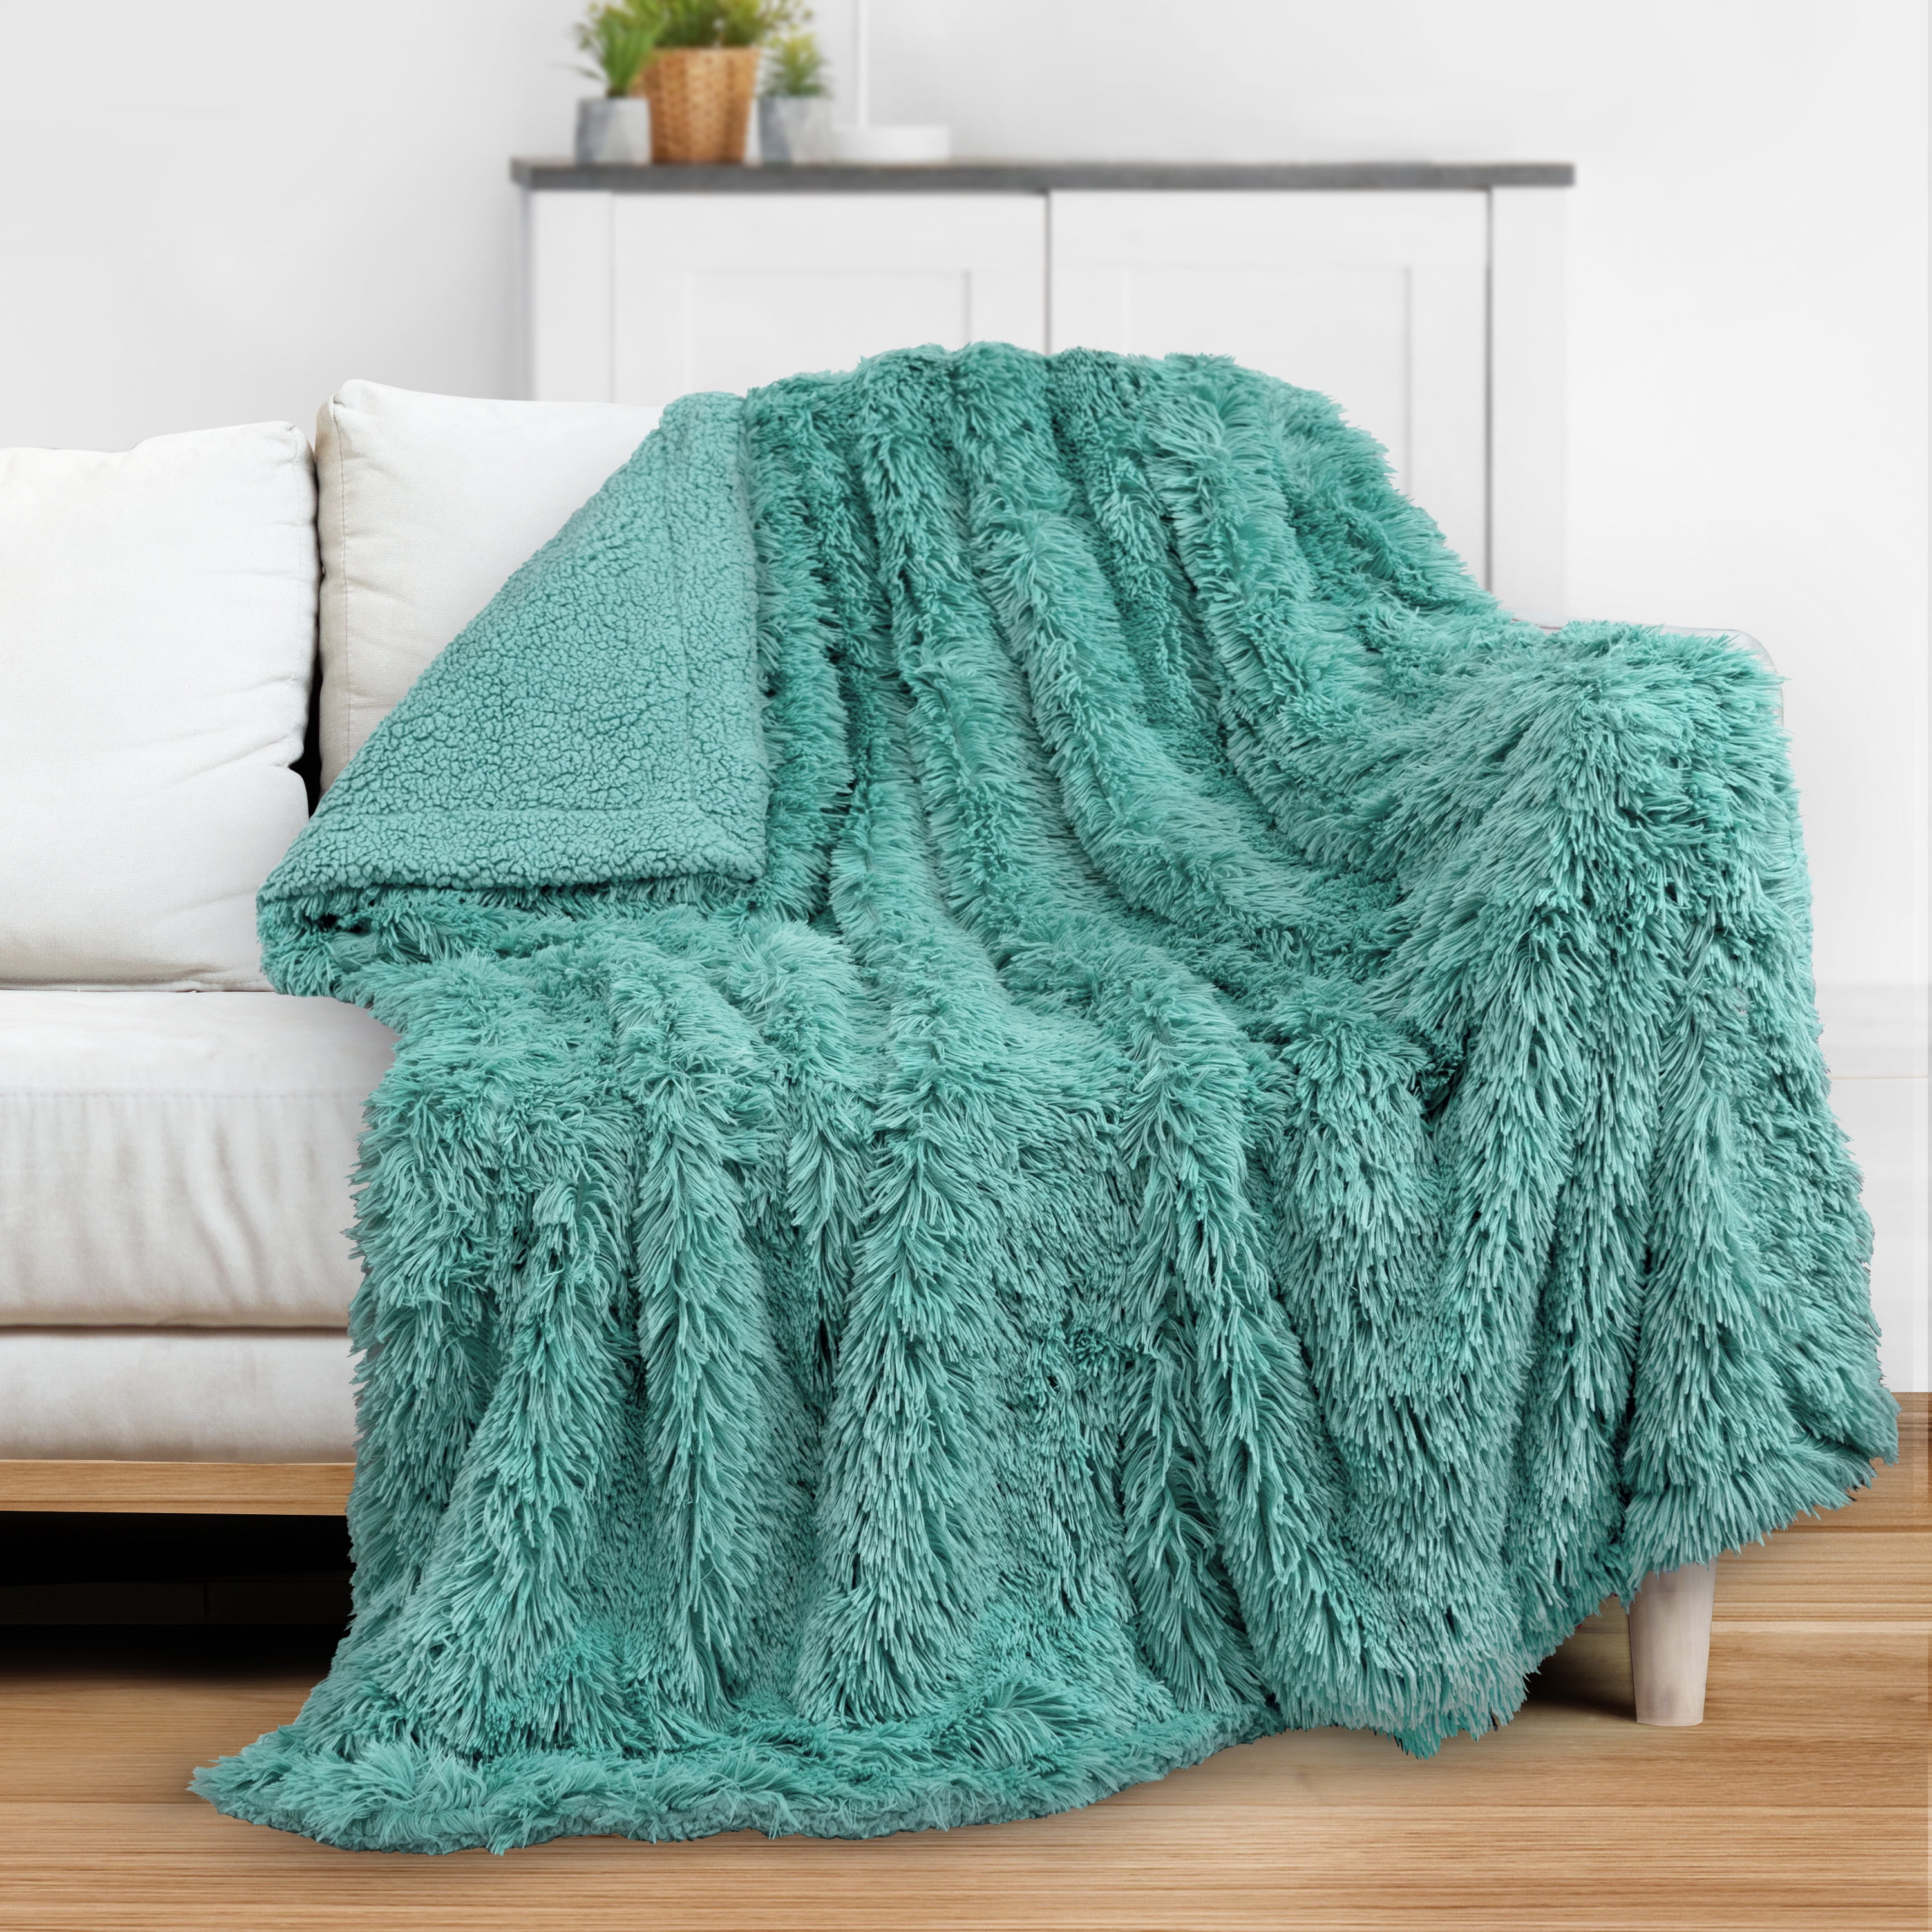 PAVILIA Fluffy Teal Blue Throw Pillow Covers, Decorative Accent Pillow  Cases for Bed Sofa Couch, Soft Faux Fur Cushion Cover, Square Sherpa